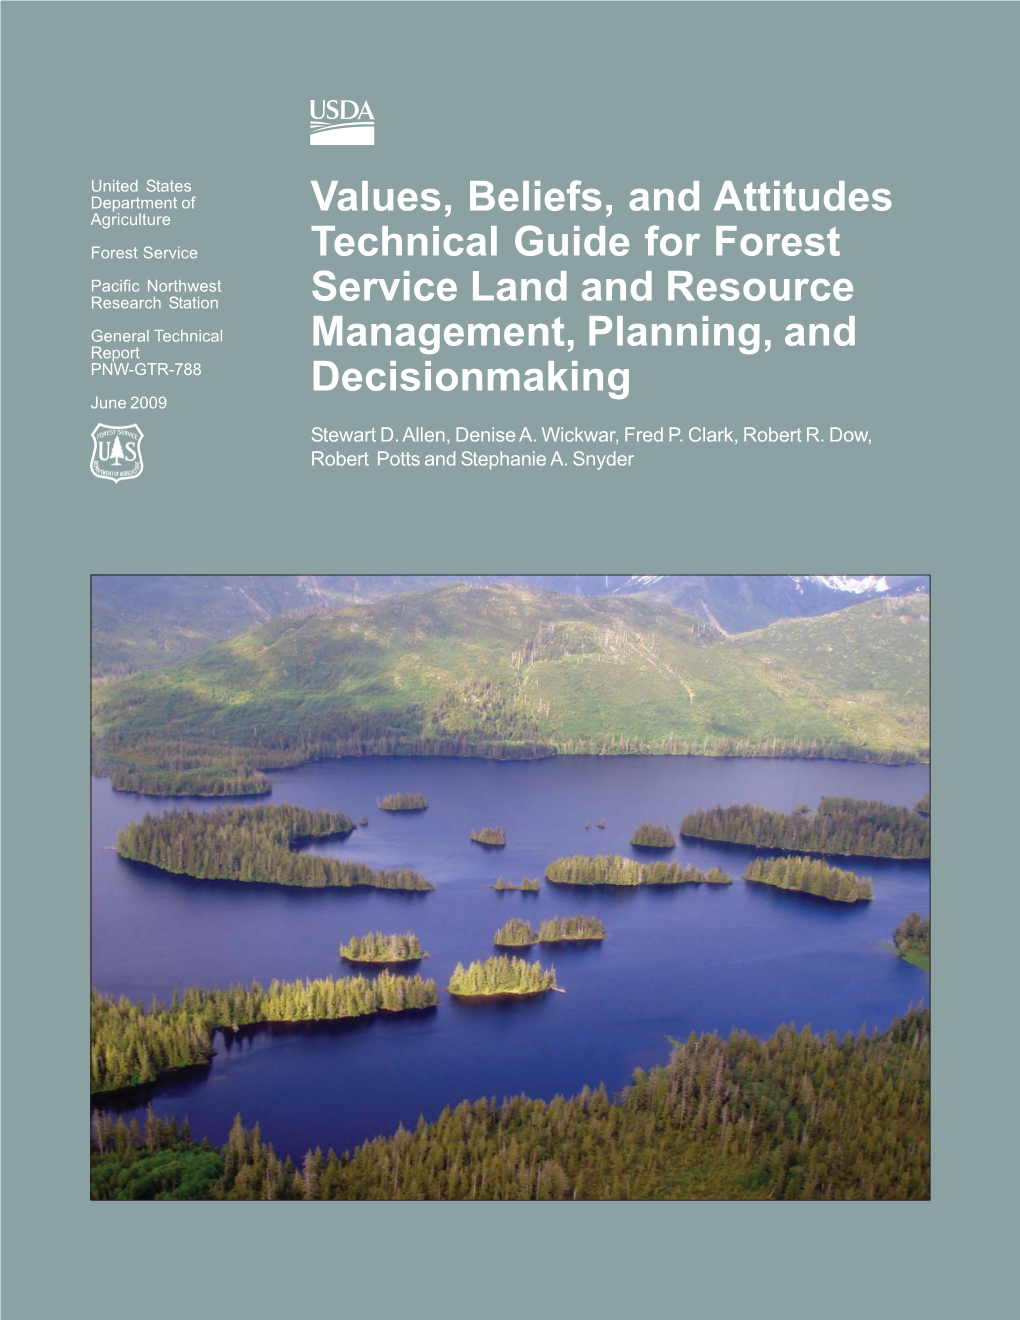 Values, Beliefs, and Attitudes Technical Guide for Forest Service Land and Resource Management, Planning, and Decisionmaking